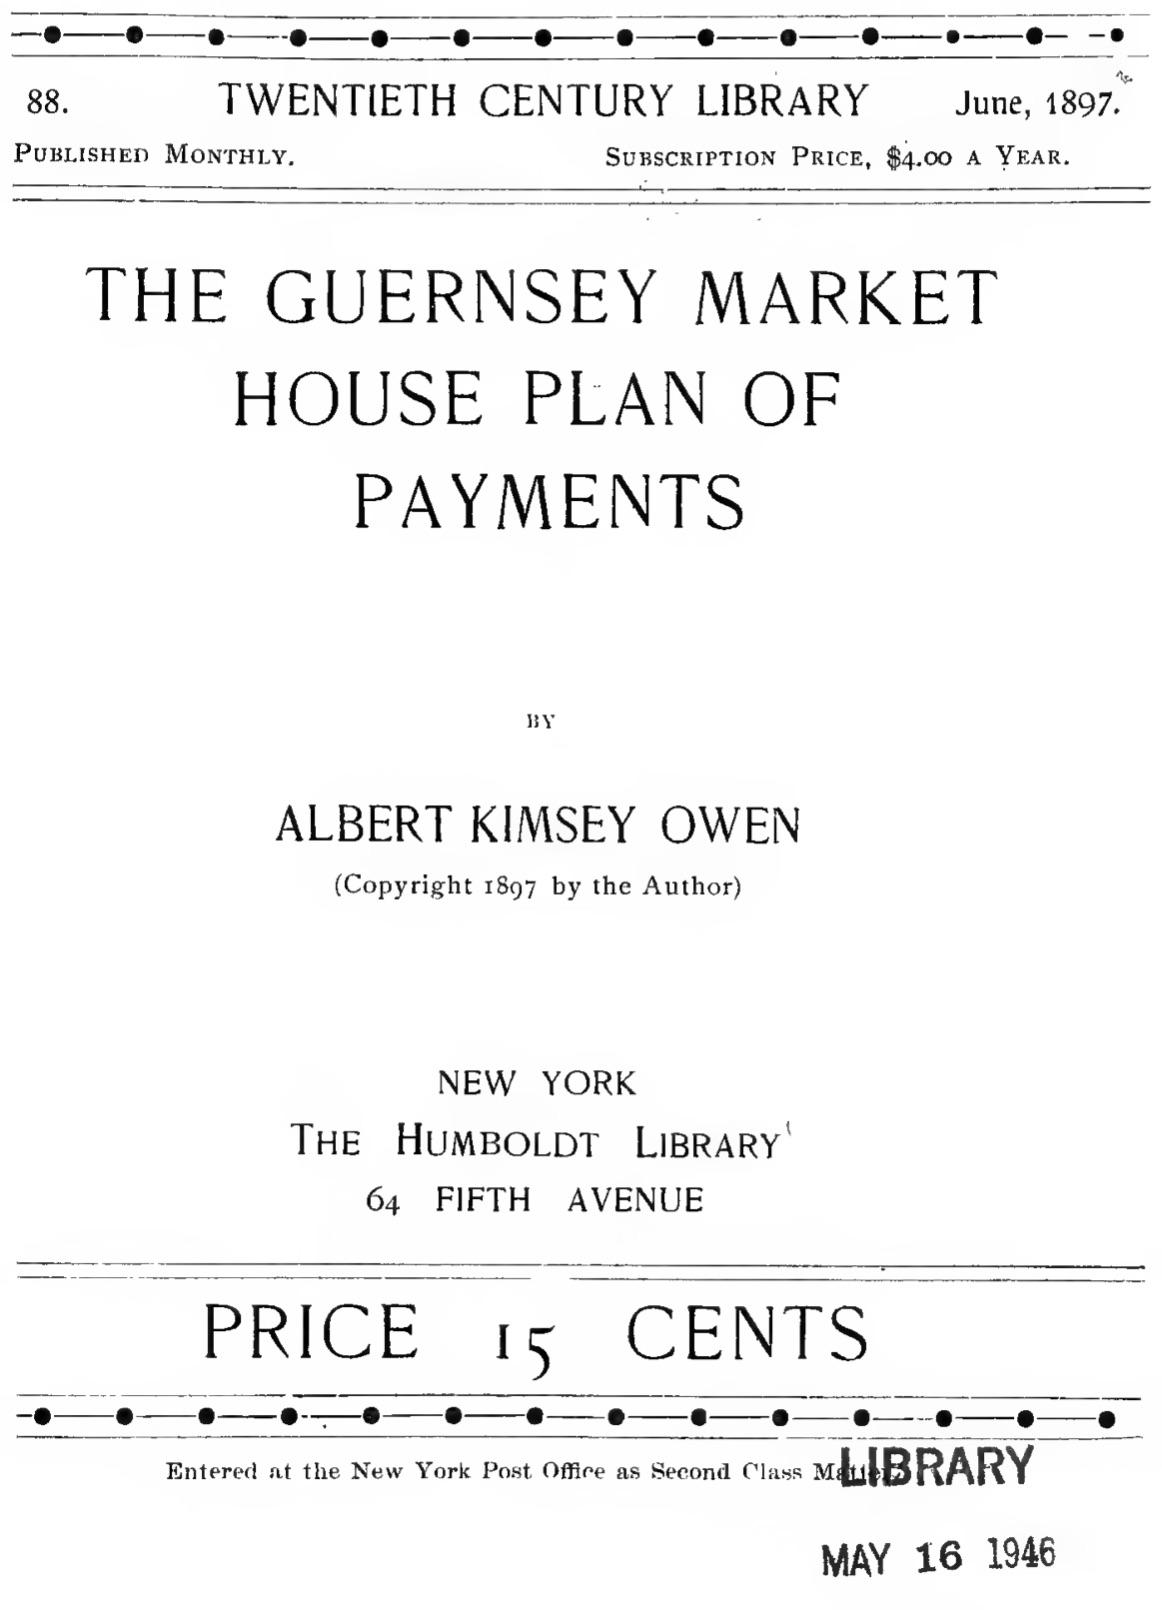 The Guernsey Market House Plan of Payments (1897) by Albert Kimsey Owen